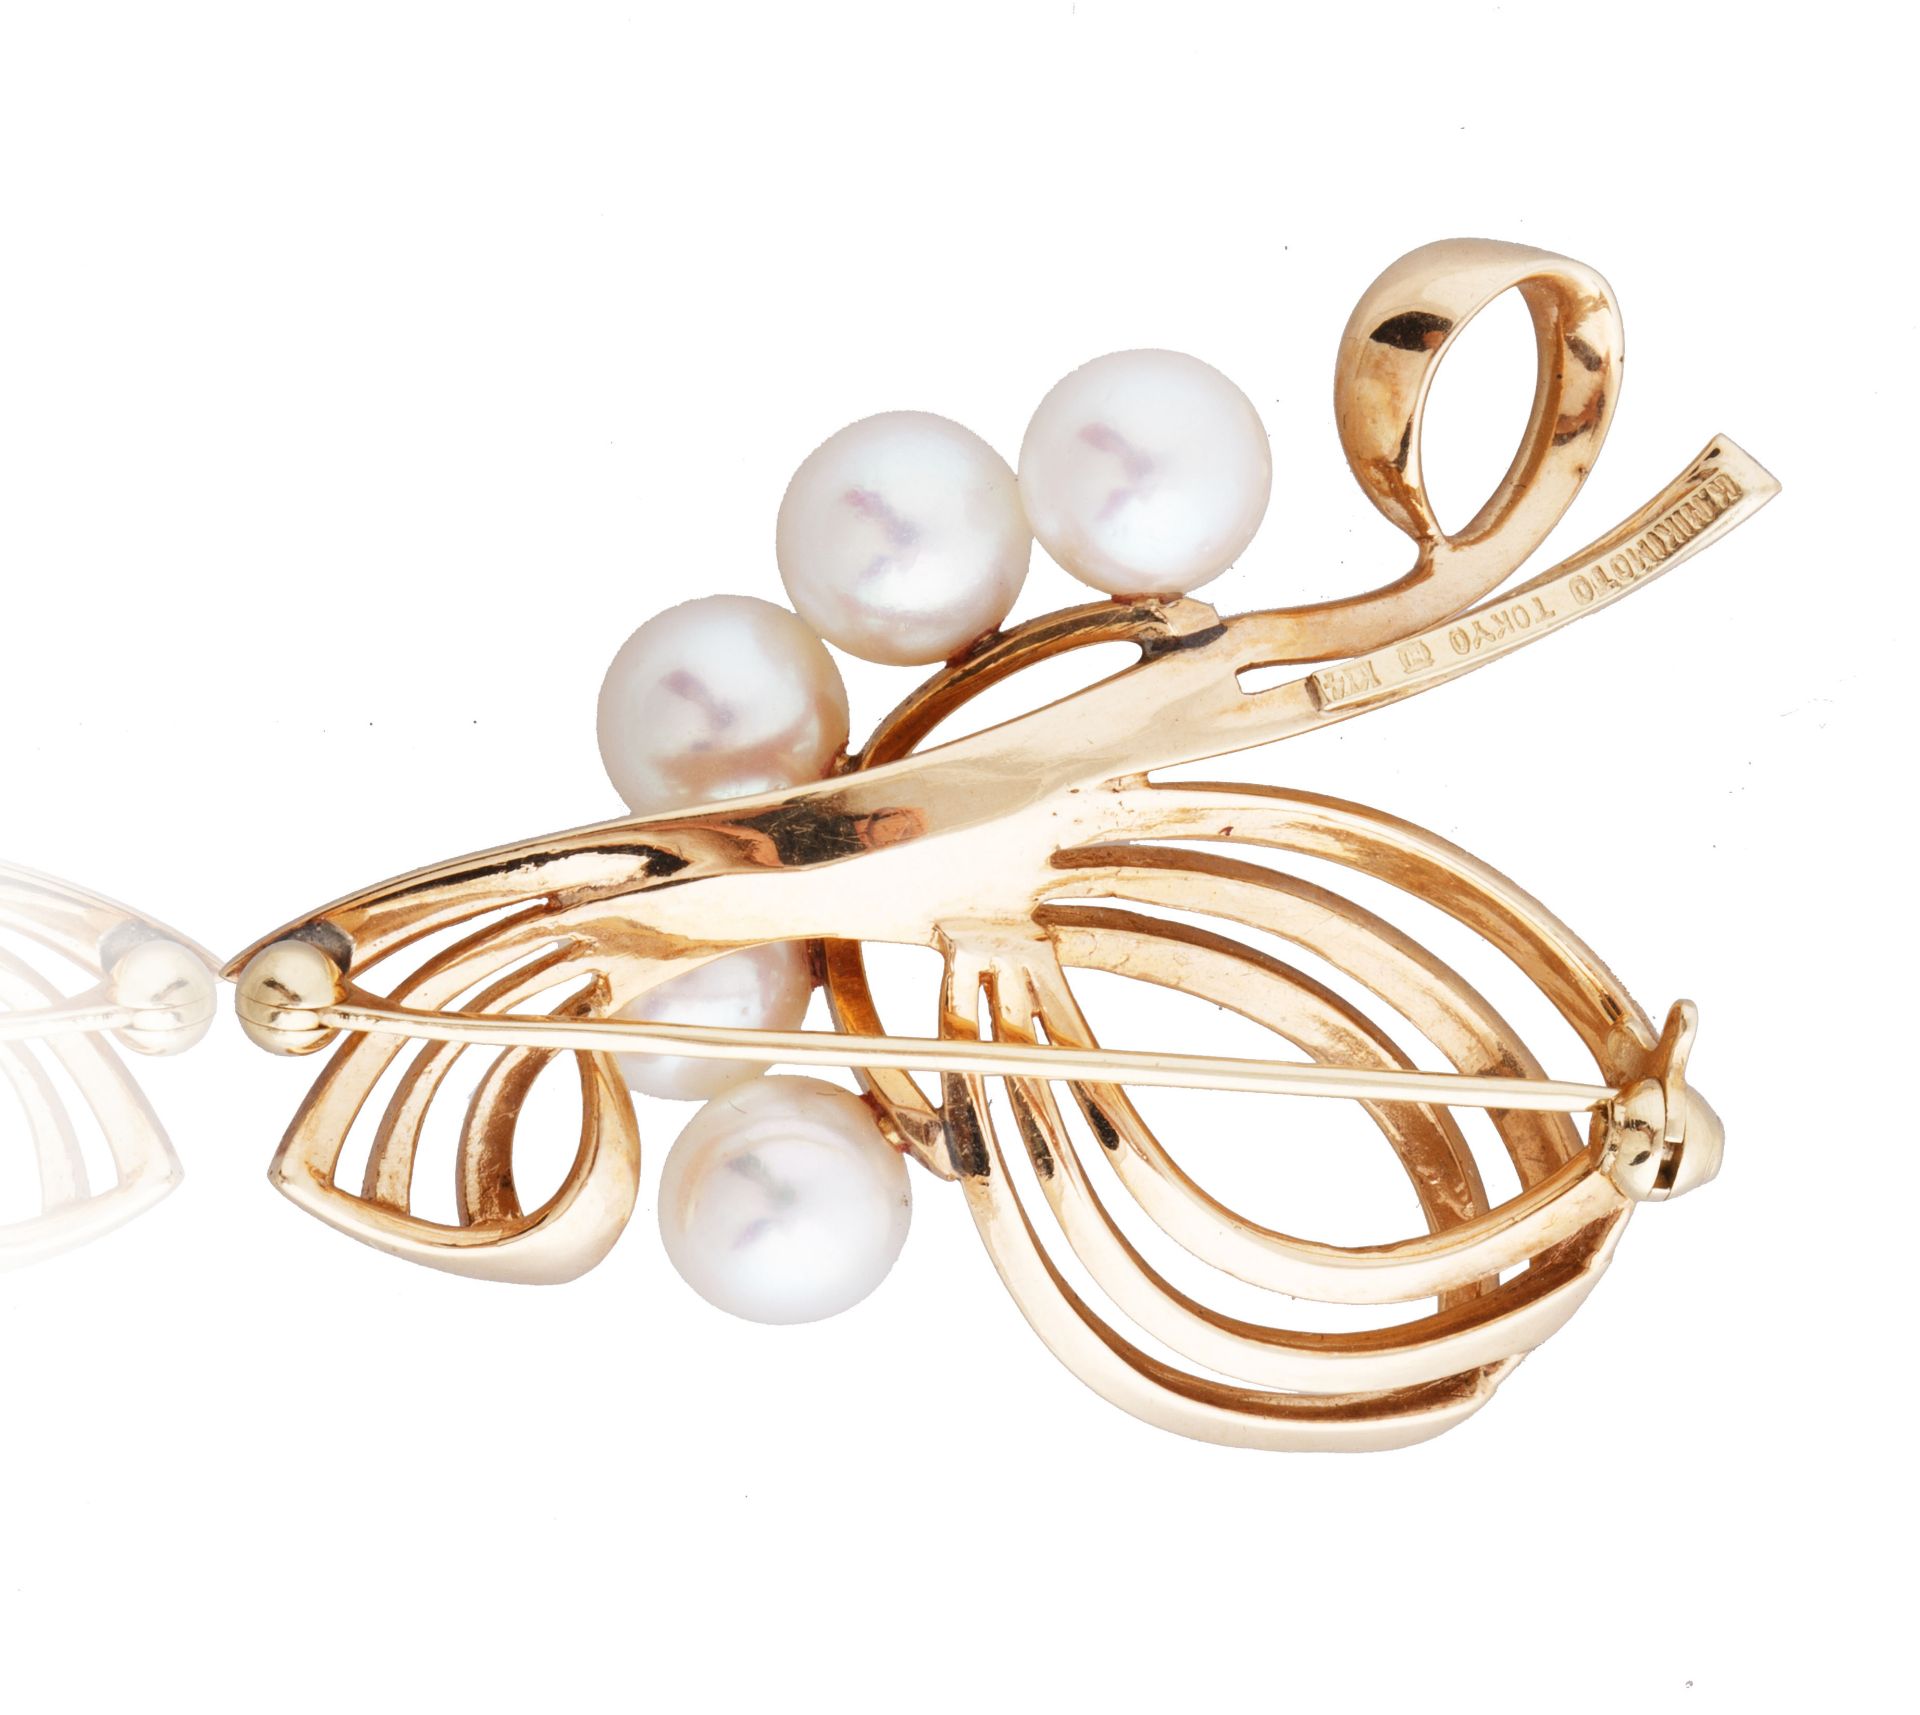 MIKIMOTO TOKYO CULTURED PEARL AND GOLD BROOCH - Image 2 of 4